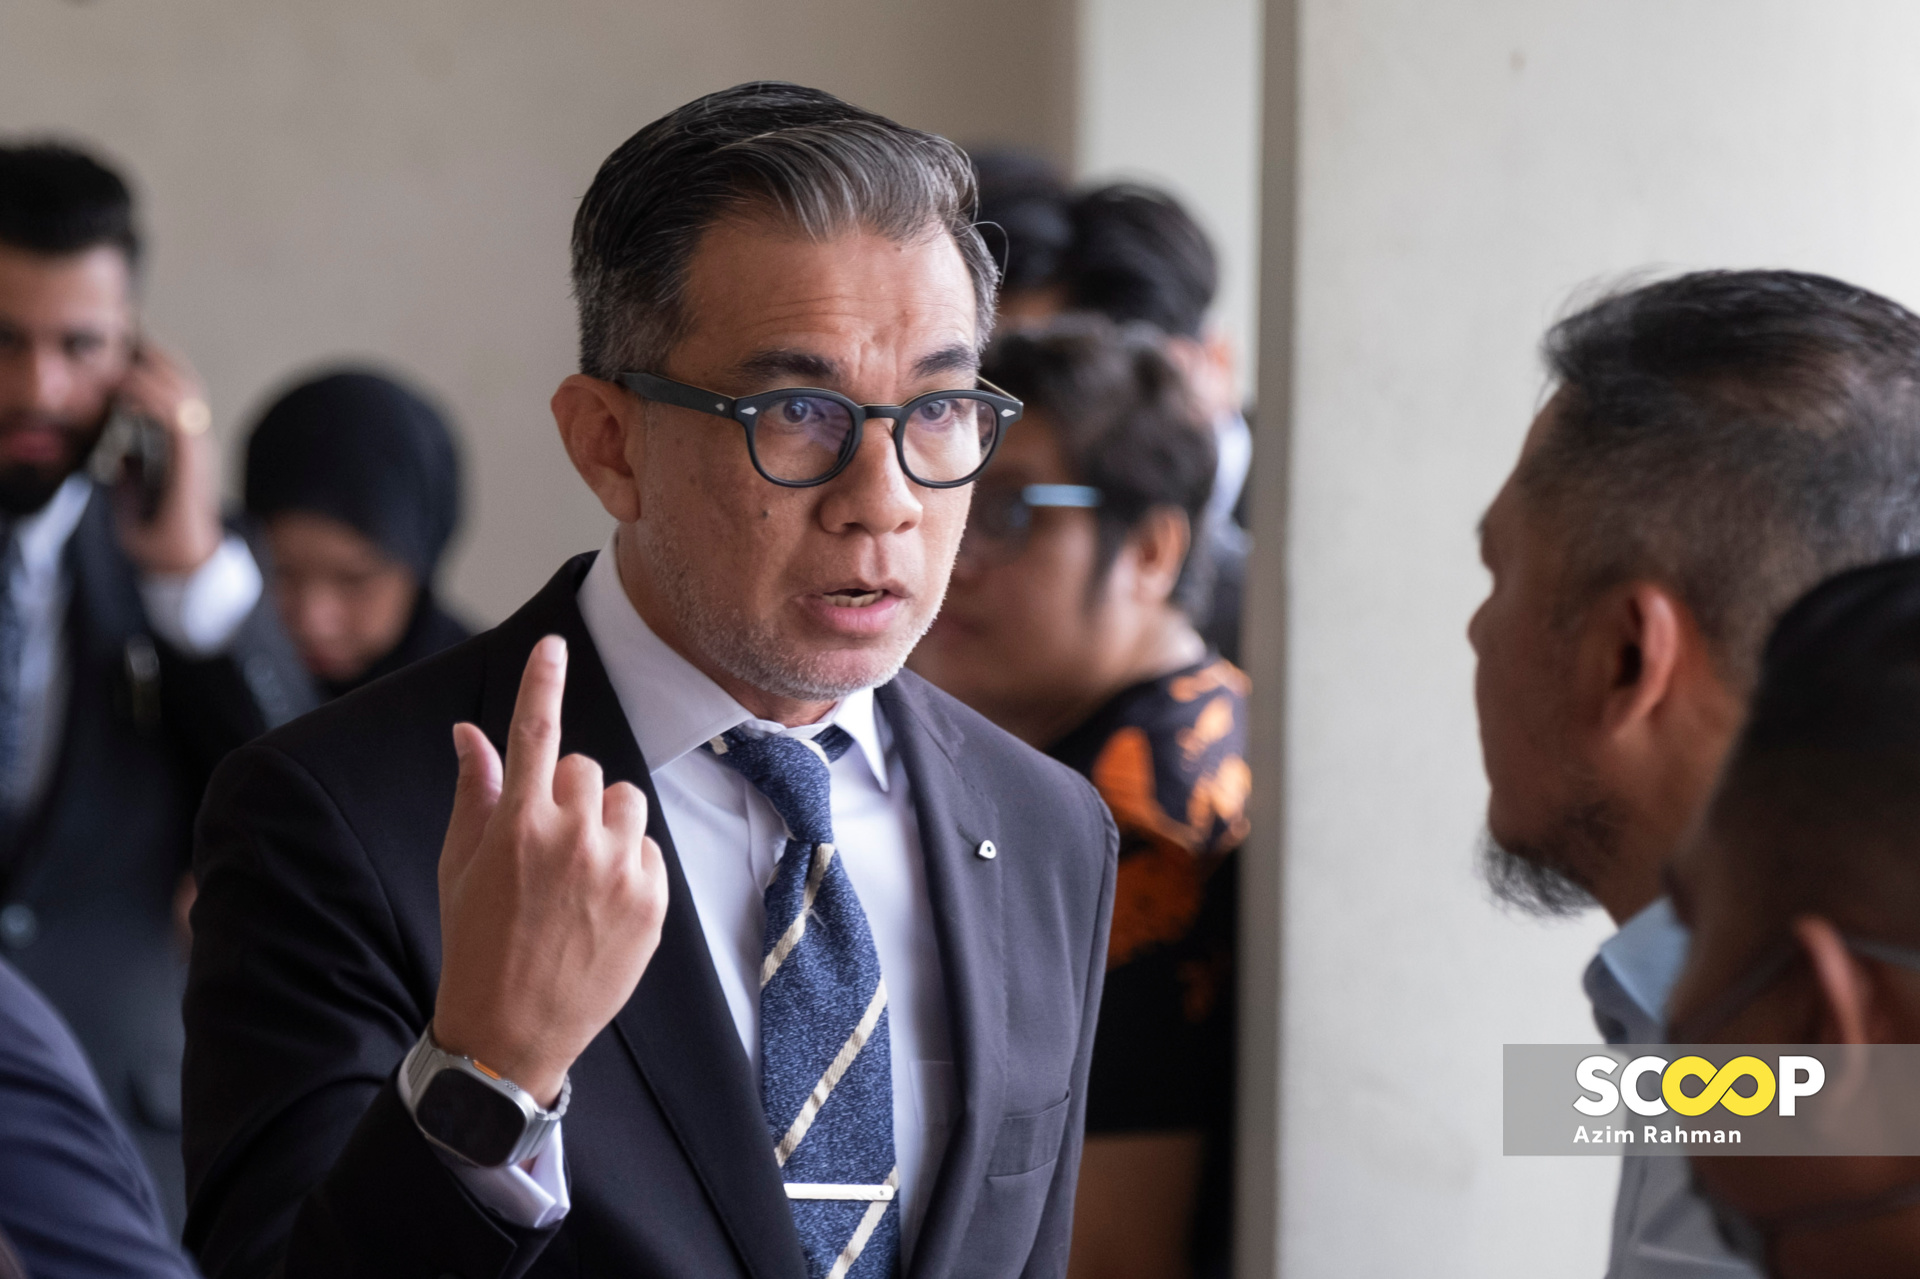 Access to lawyers: Zayn Rayyan’s parents case shows need to be aware of personal rights under arrest